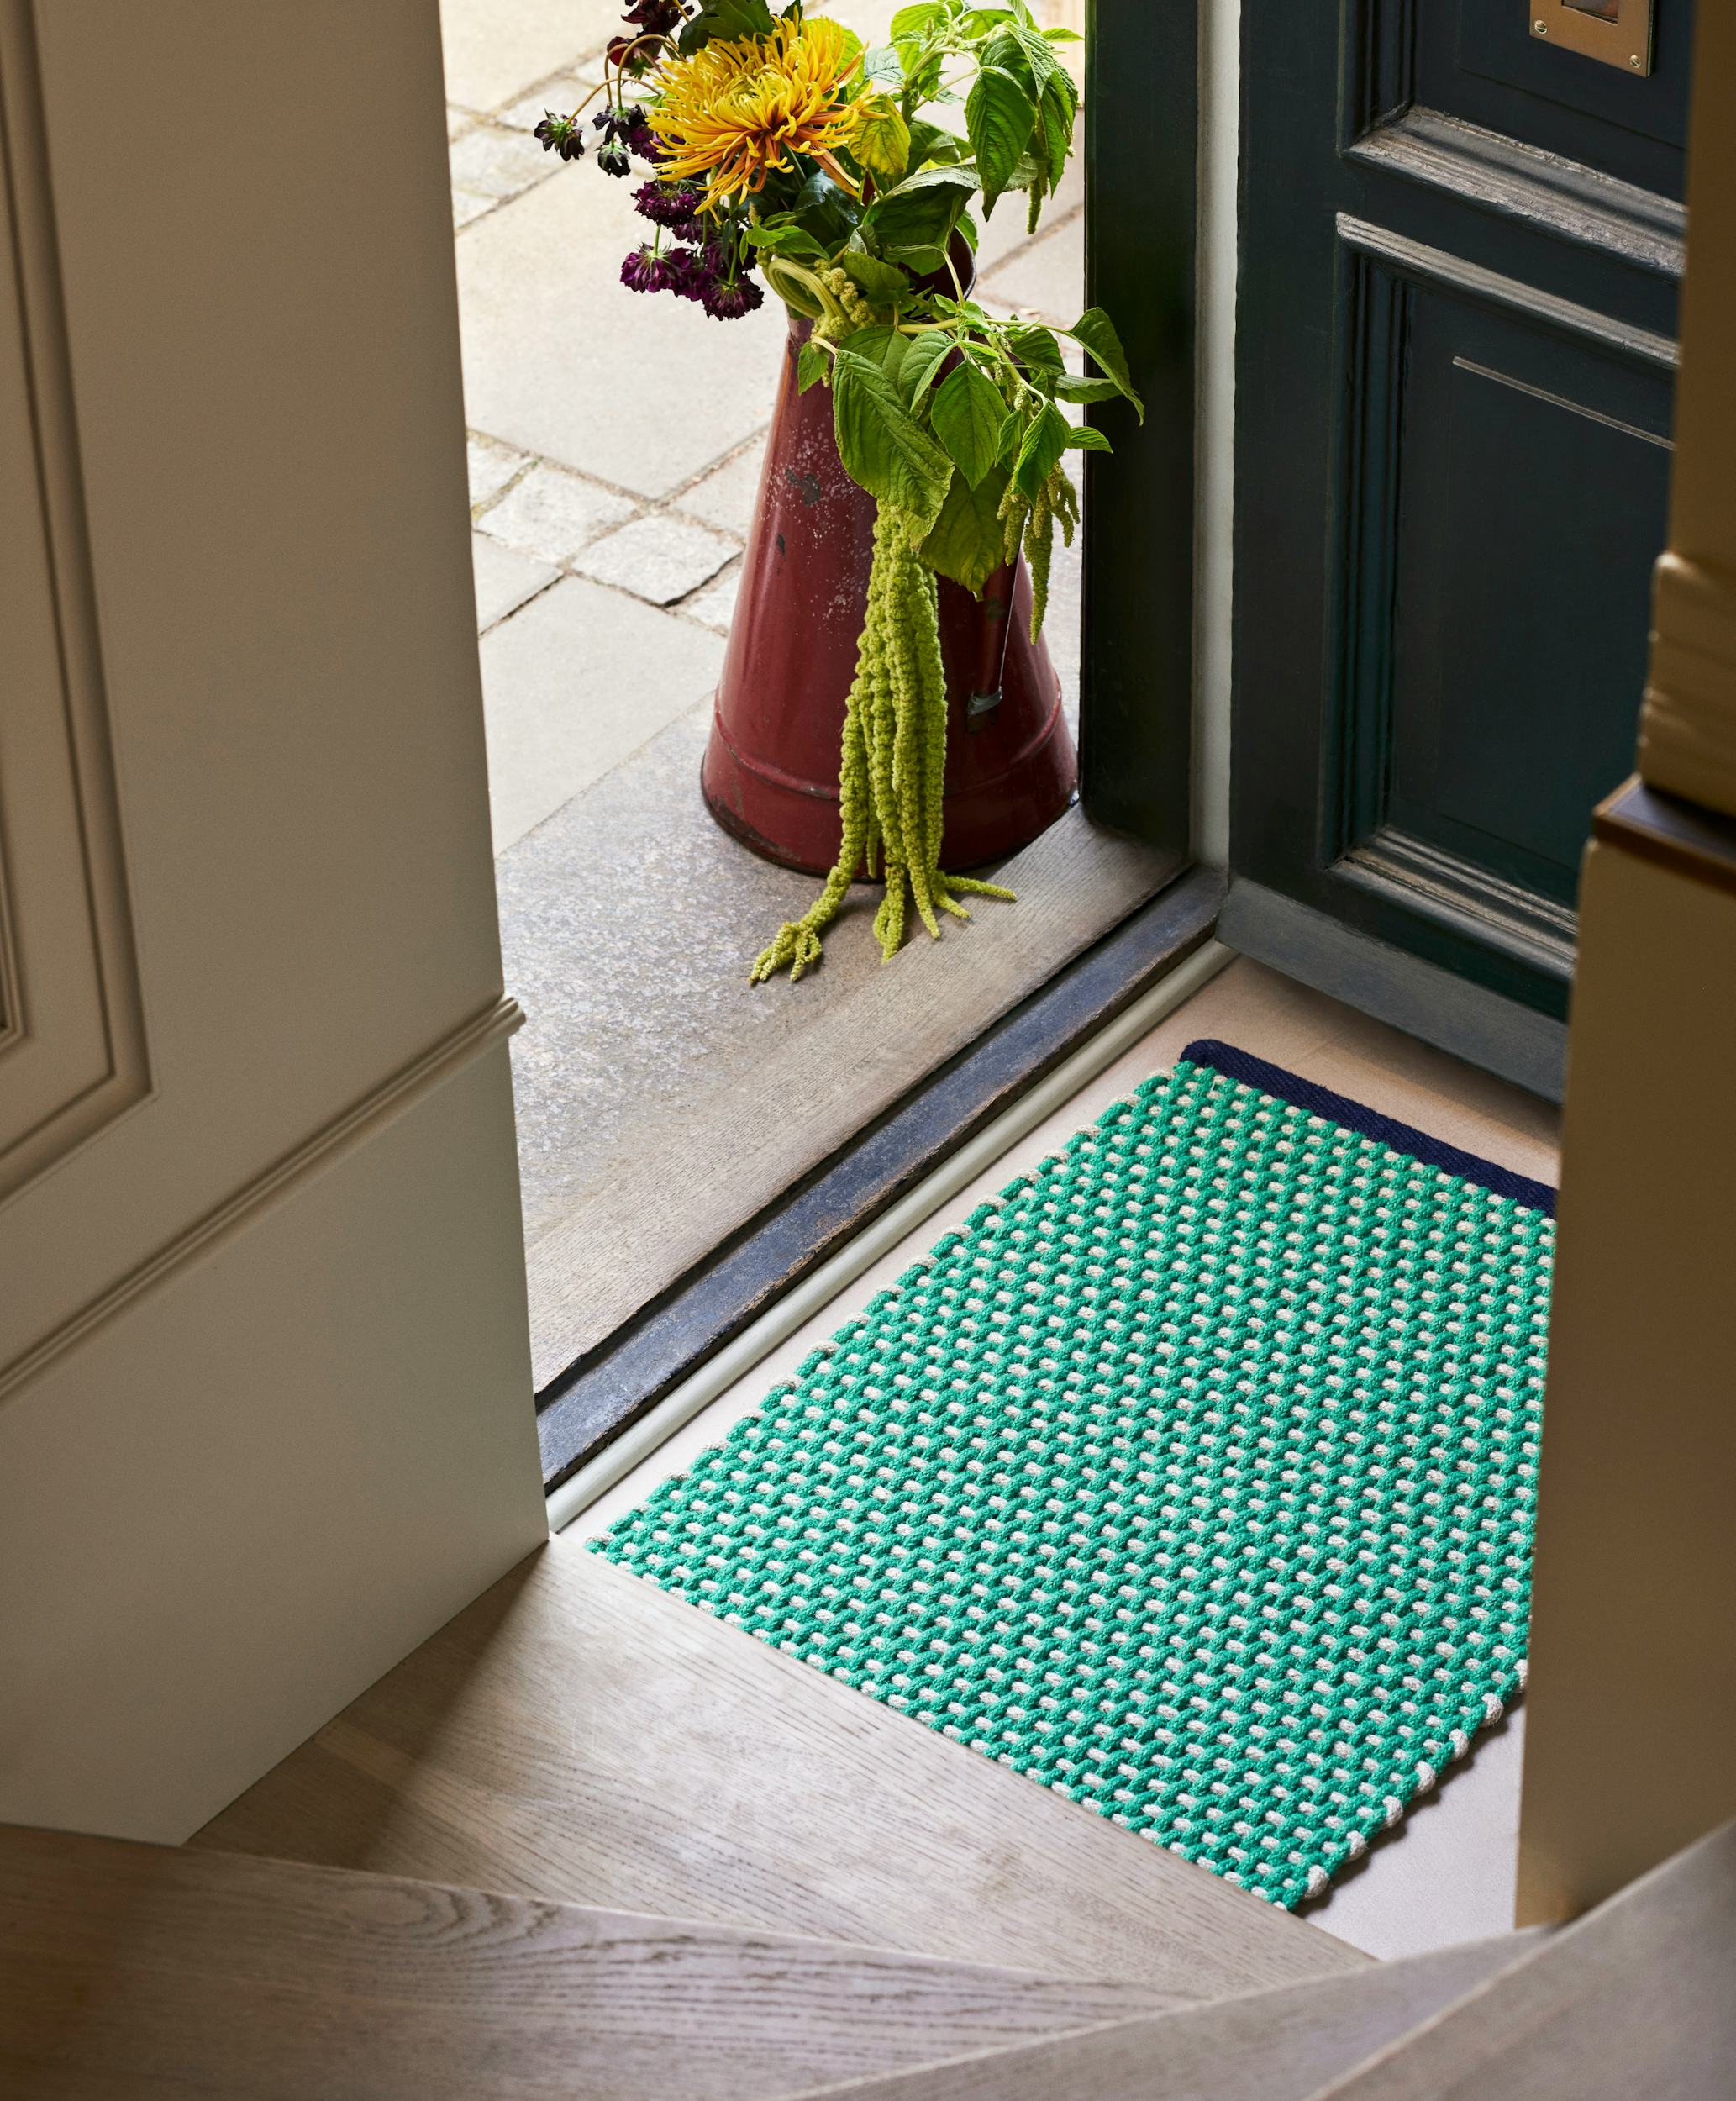 Industrial Entrance Mats and Runners Guide